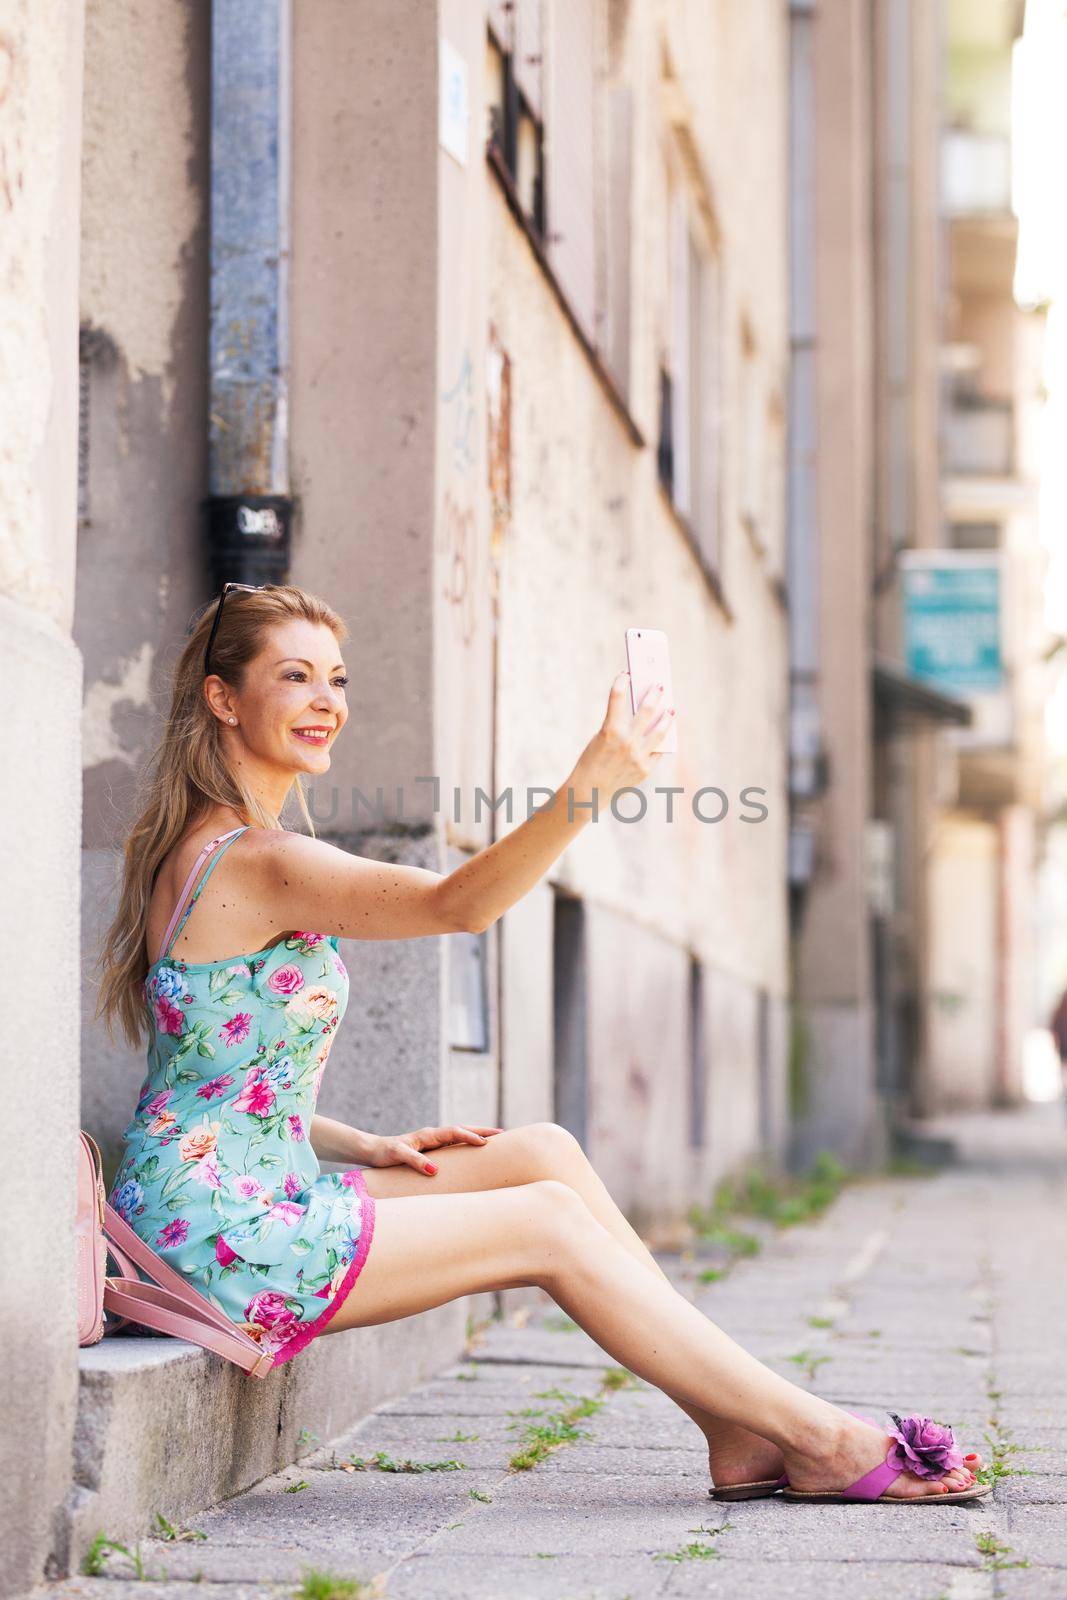 girl sitting on the sidewalk taking selfie photo with her phone